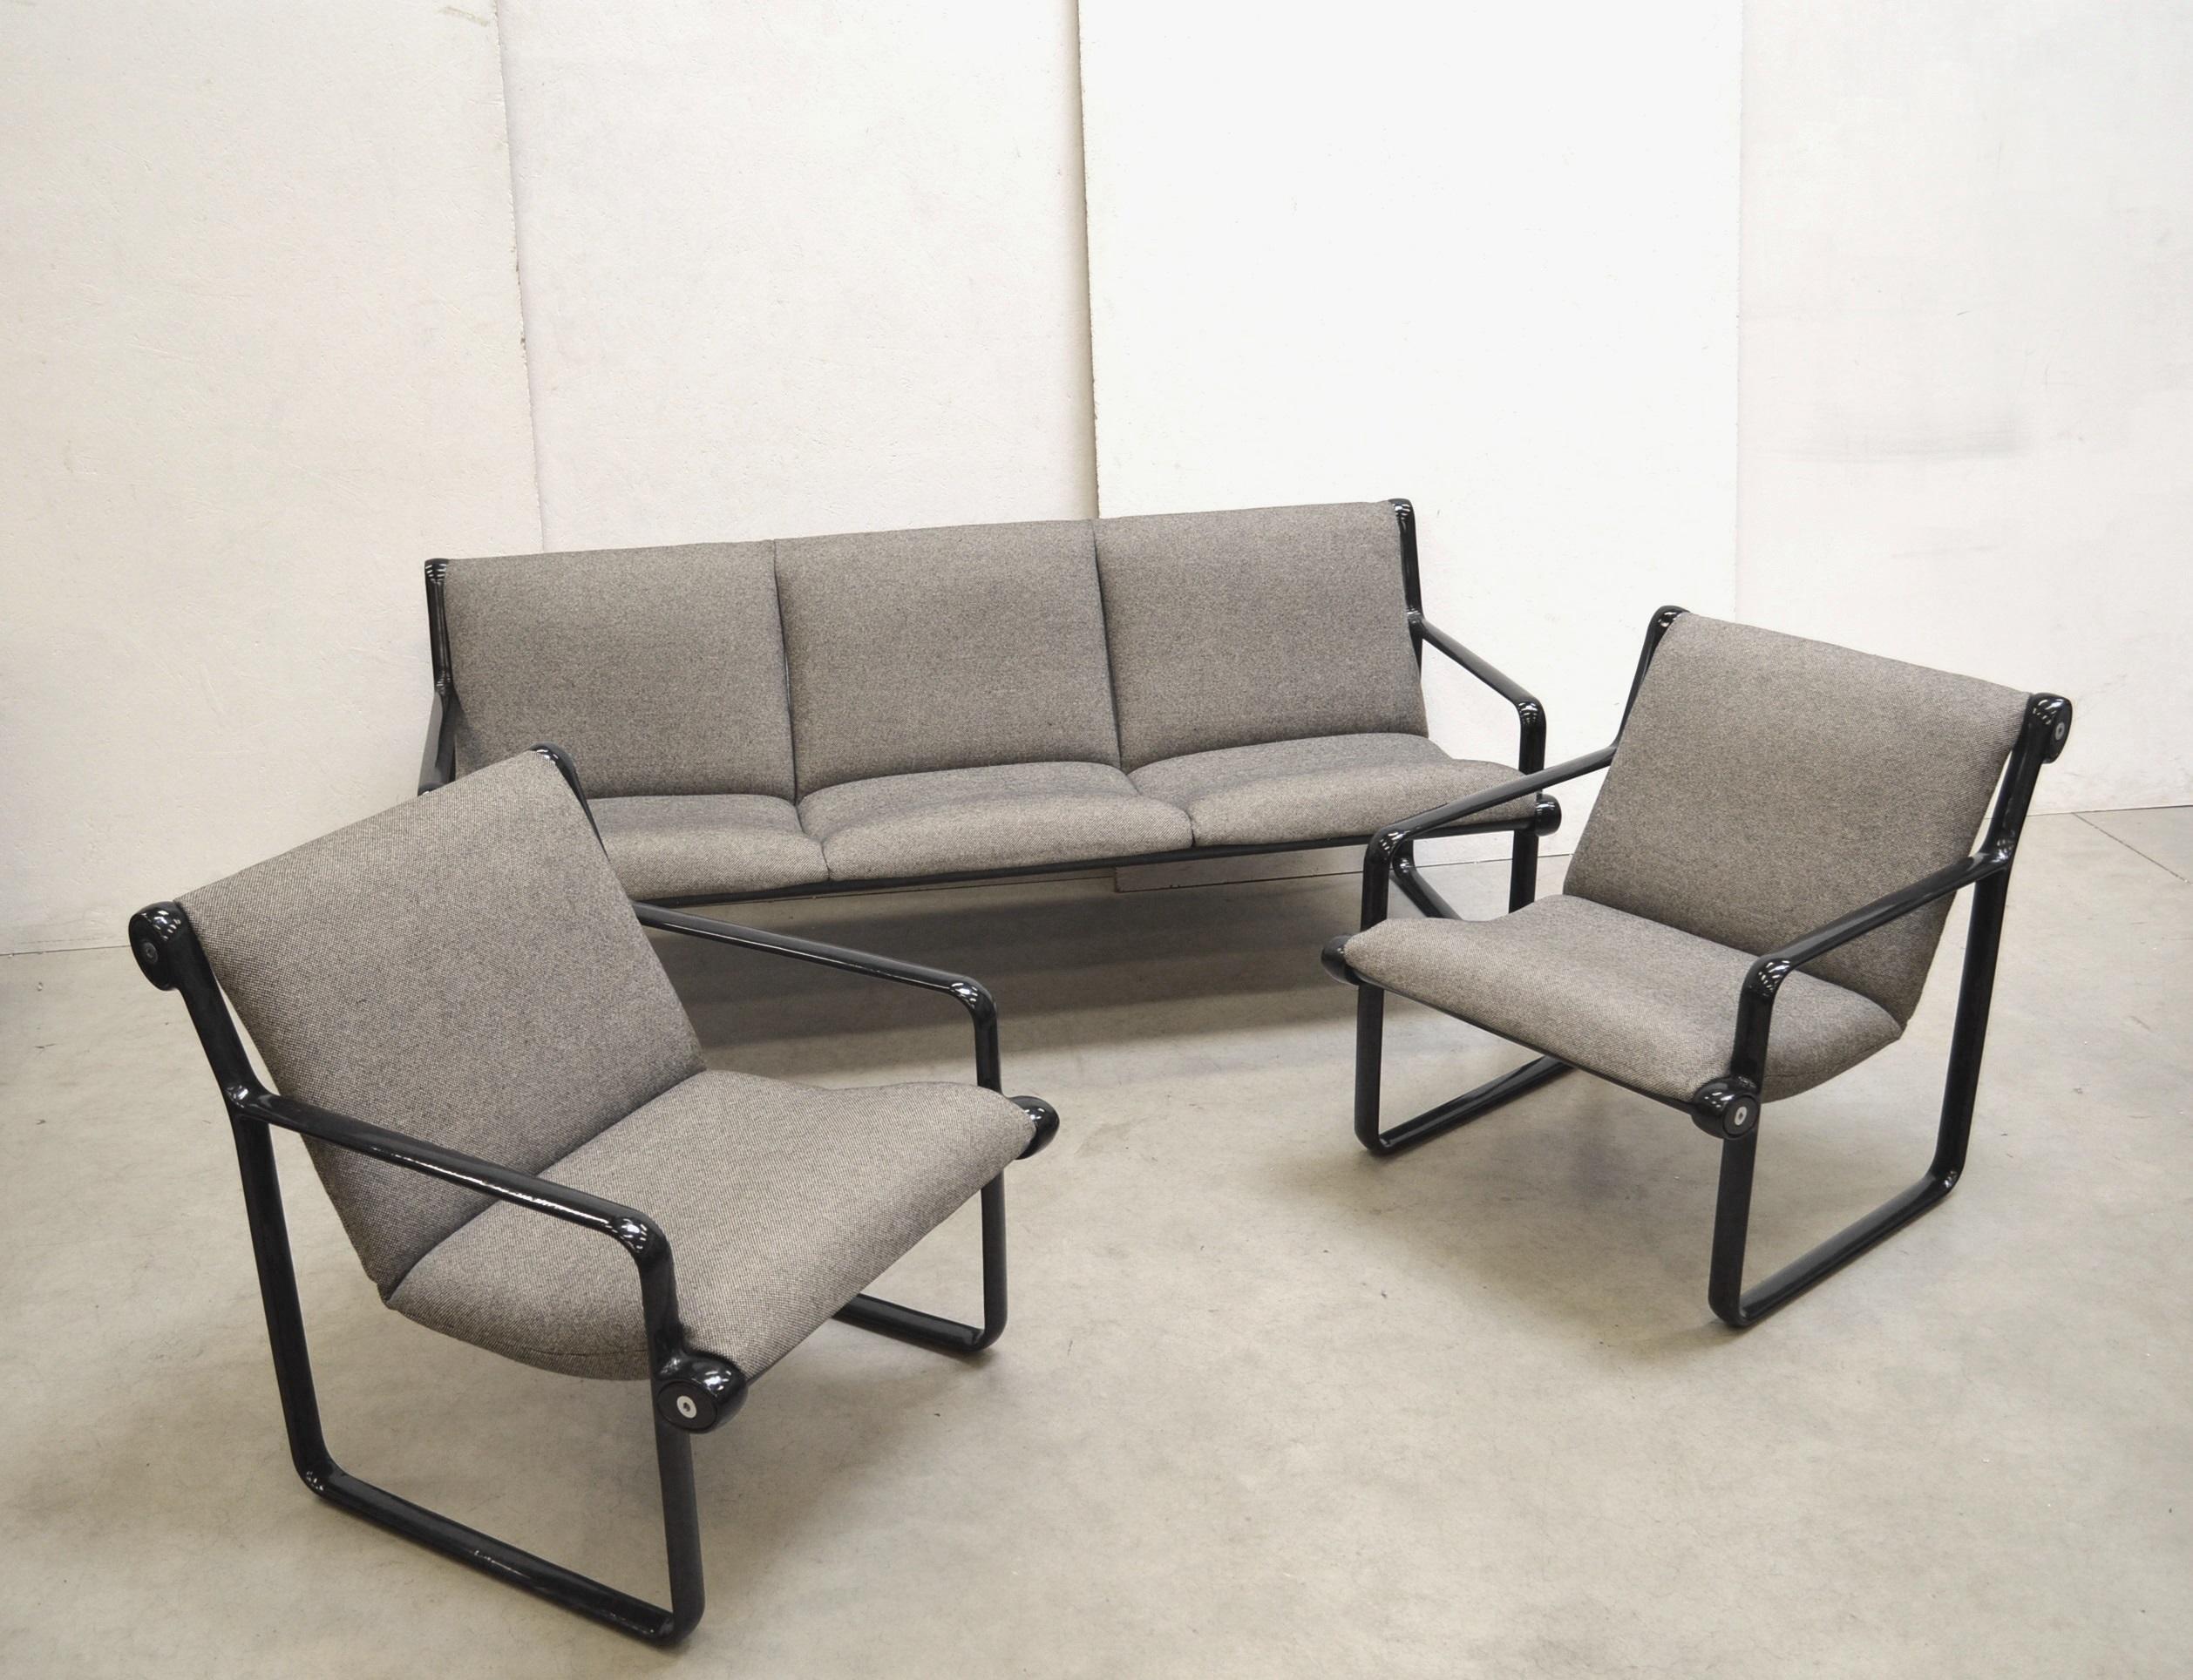 Rare living room suite which includes a settee, 2x armchairs and a coffee table designed in 1971 by Bruce Hannah and 
Andrew Morrison and made by Knoll. This set suits also perfect in an office. 

All pieces are in lovely condition, the wool